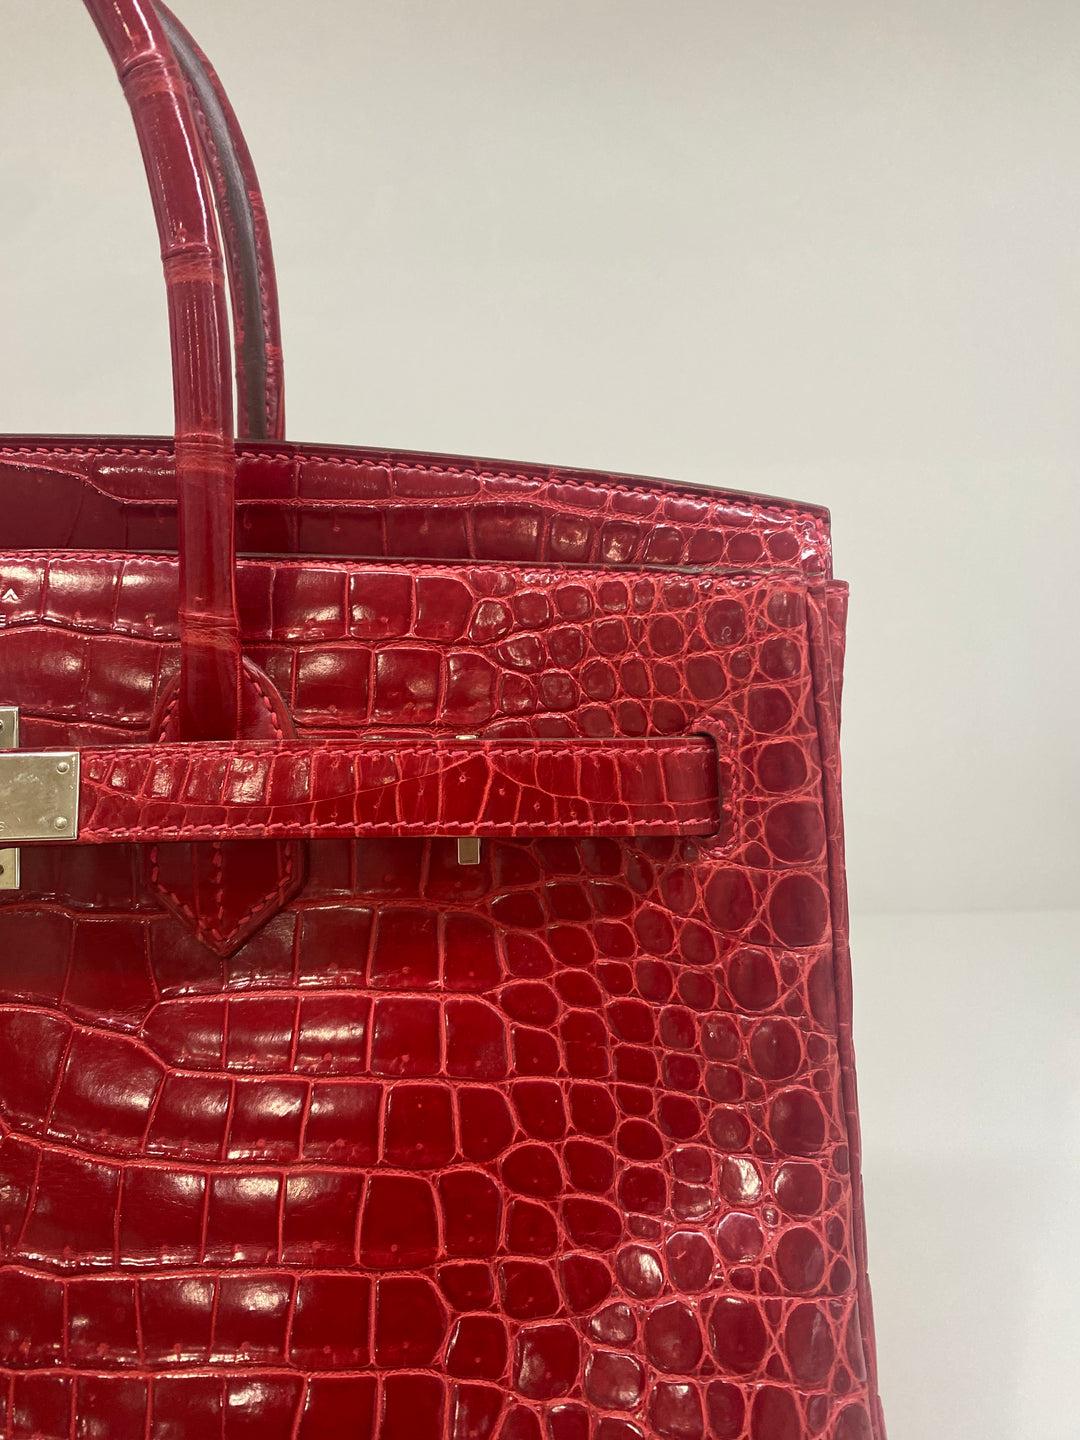 Hermes Birkin 35 Red Alligator PHW In Good Condition For Sale In Double Bay, AU